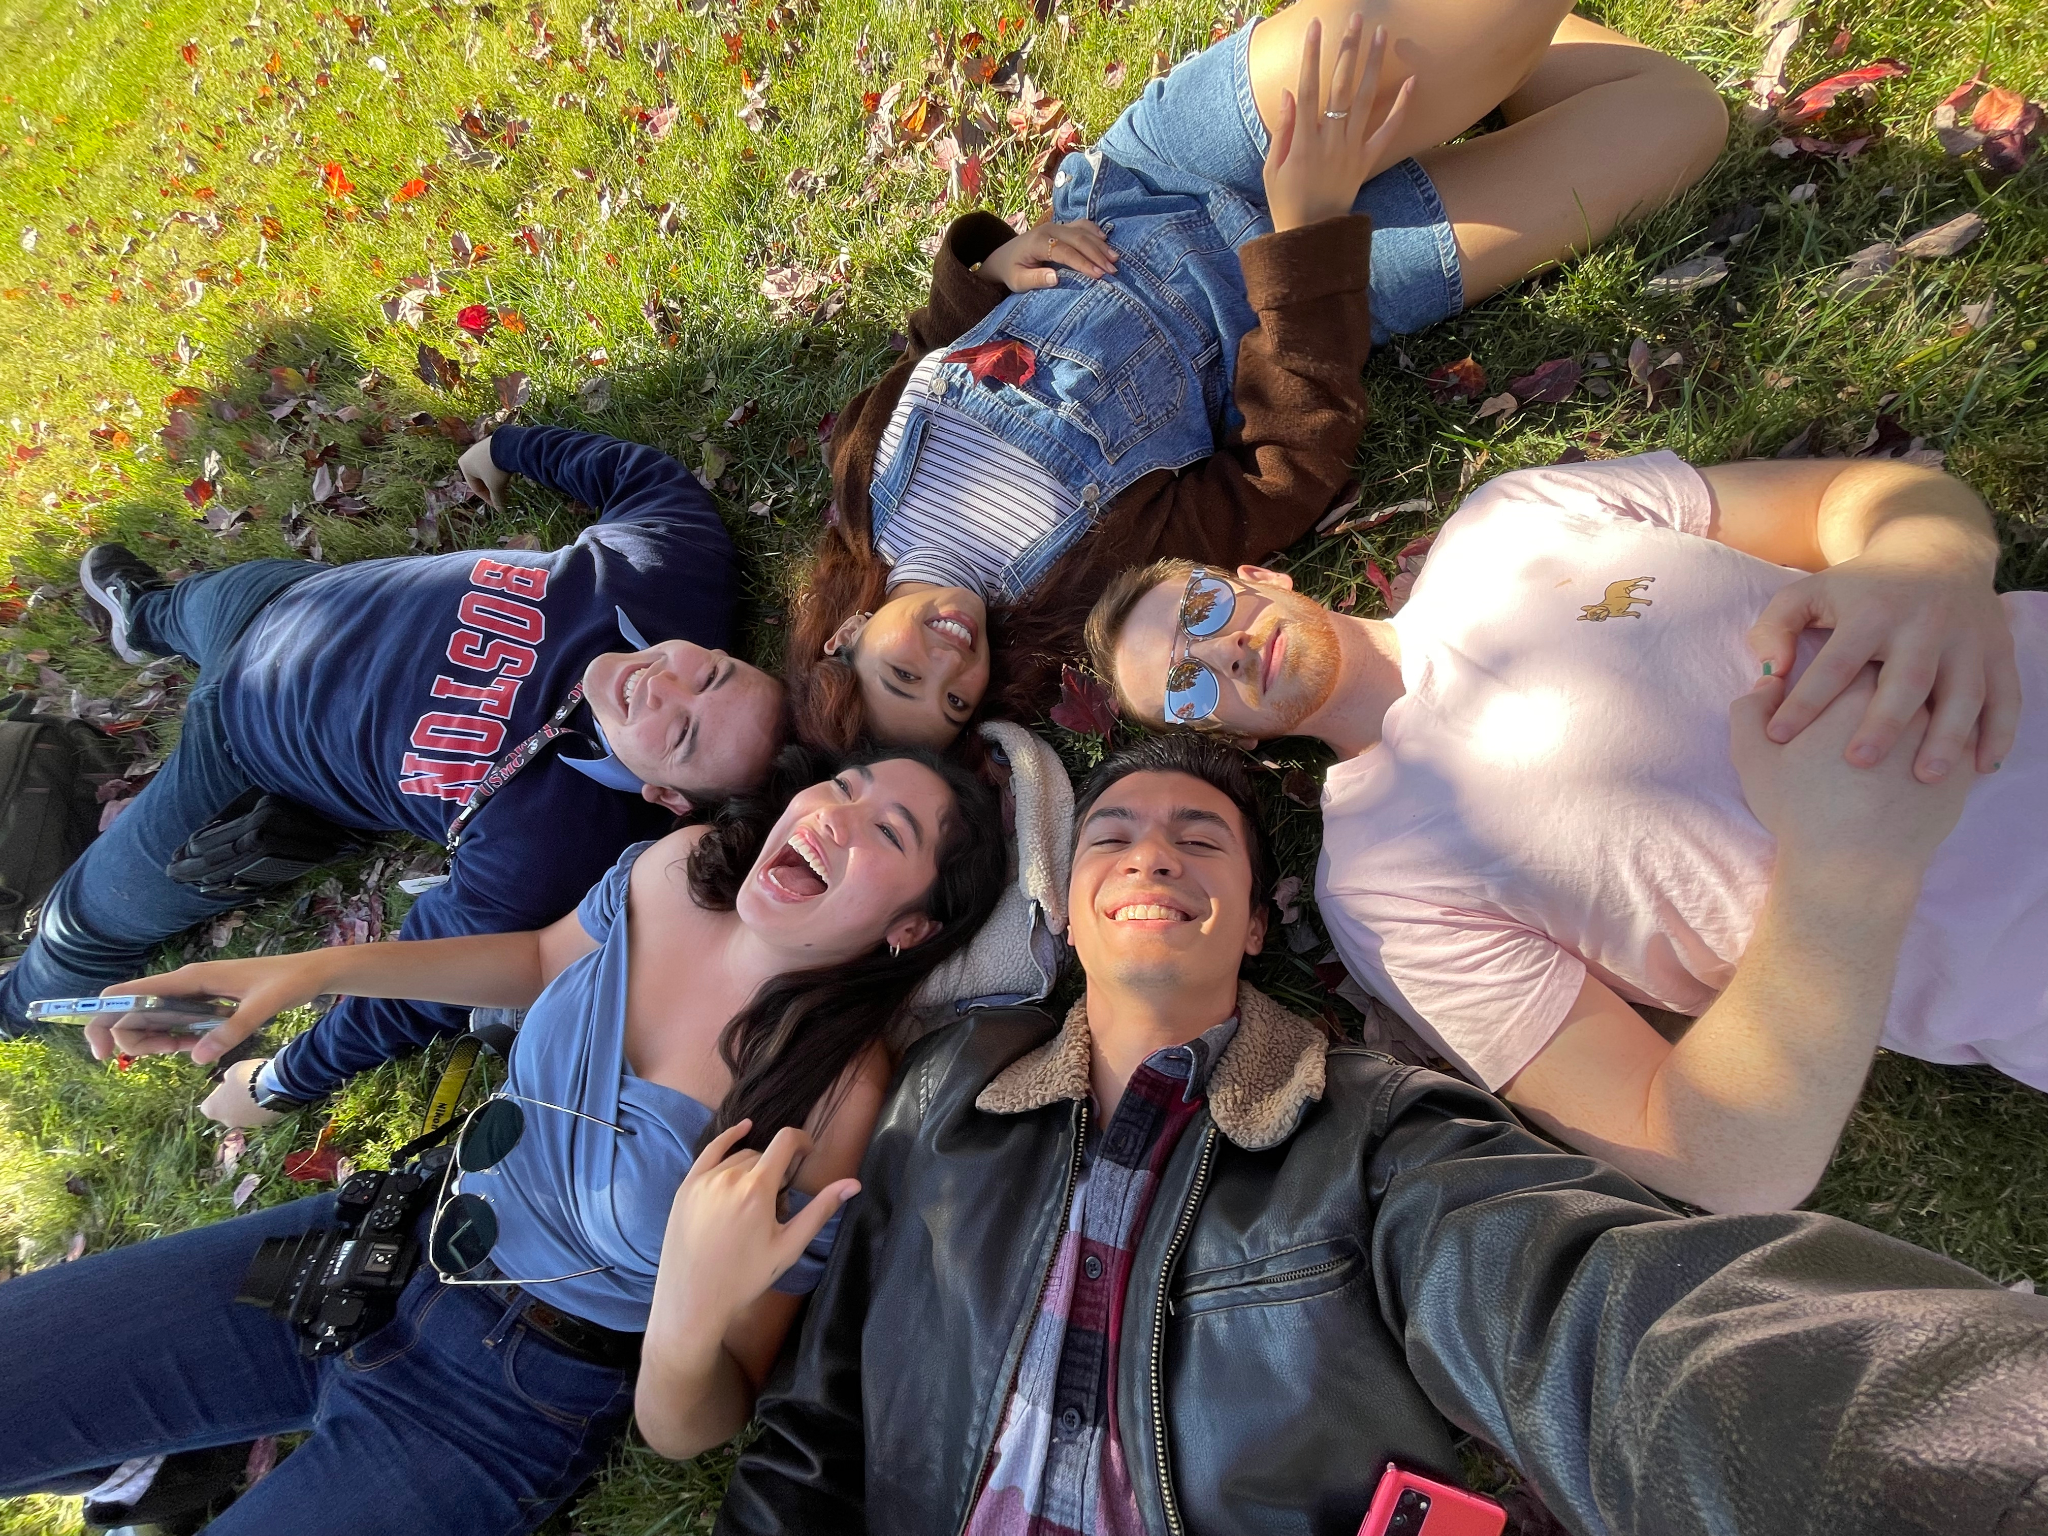 Andrew Neciuk lying down in the center, surrounded by a group of peers in Washington D.C.